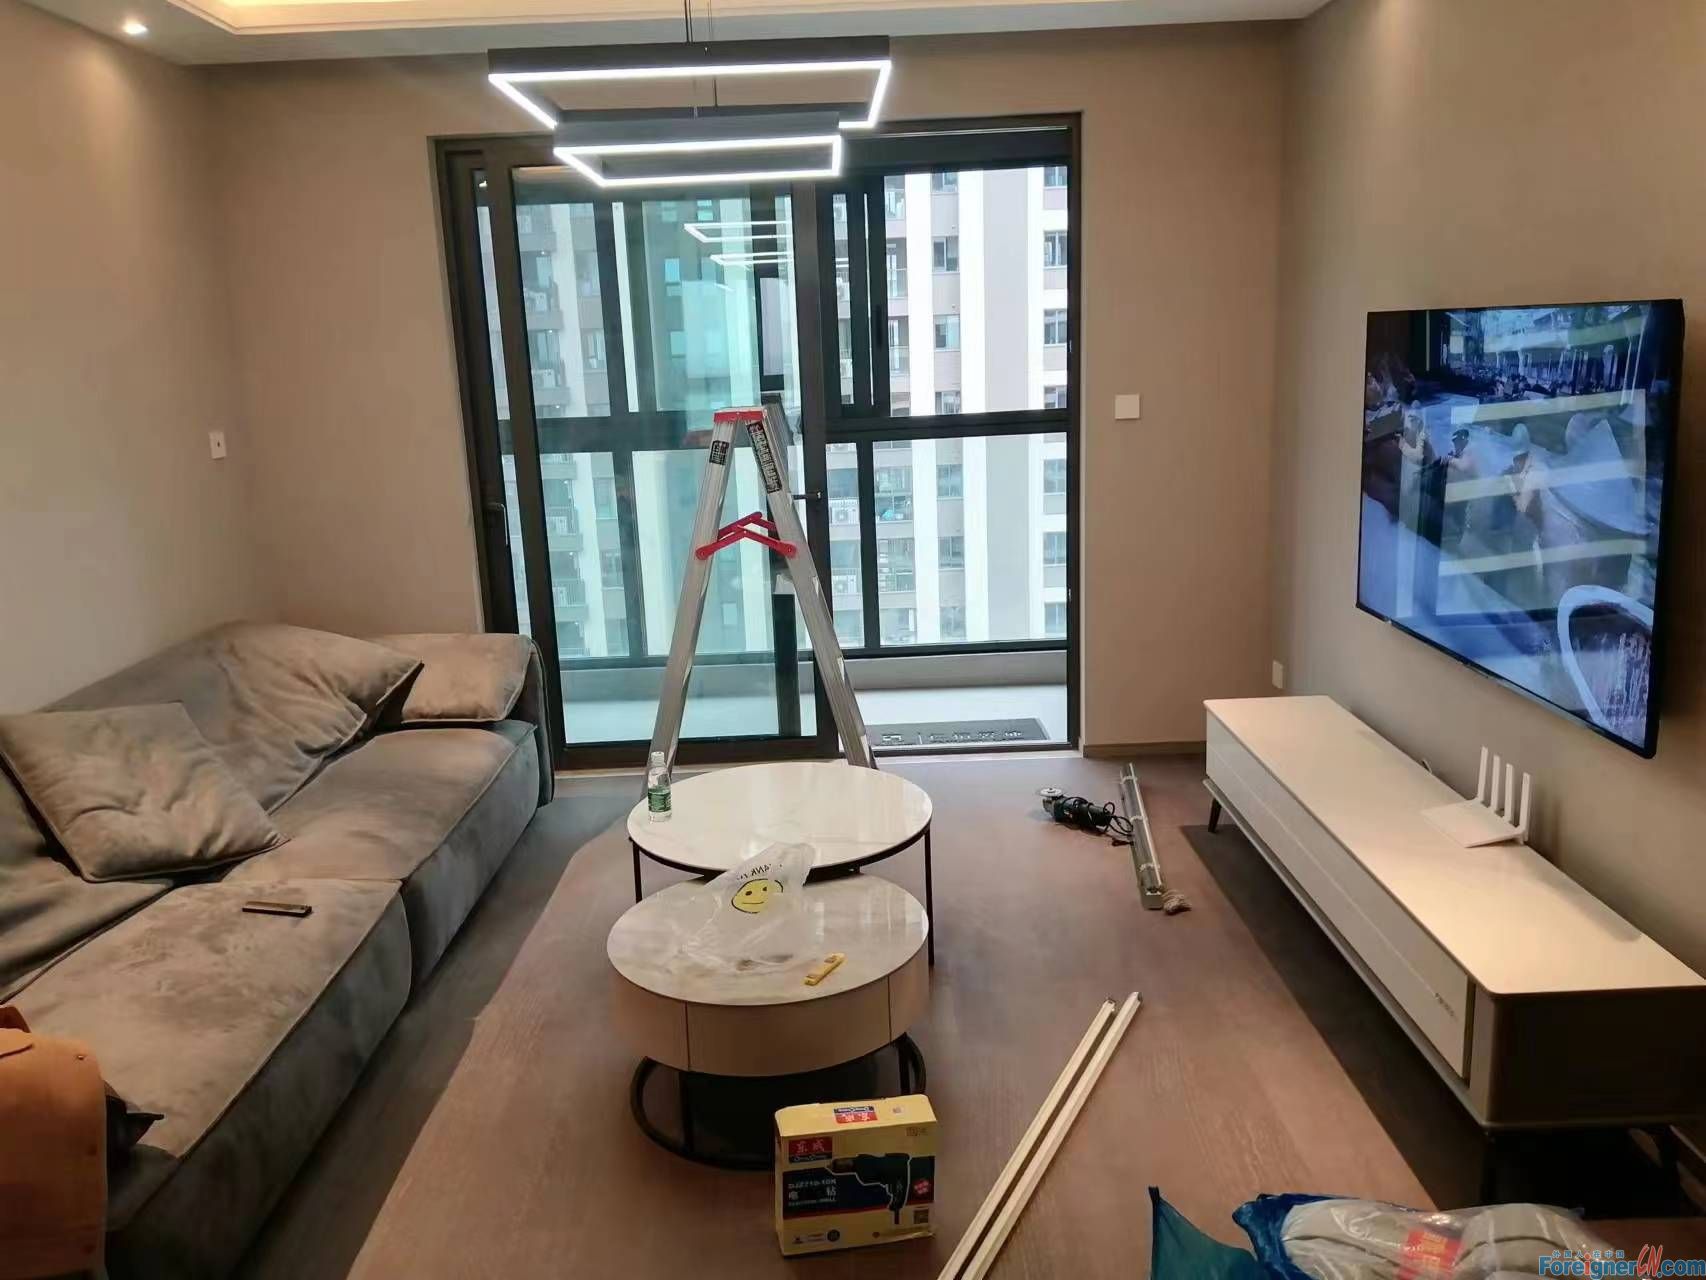 Spacious!!! New apartment rent in Xiangcheng /3 bedrooms and 2 bathrooms/Central AC ,Floor heating/well-furnitured/Close to Suzhou Foreign Language school Xiangcheng Campus